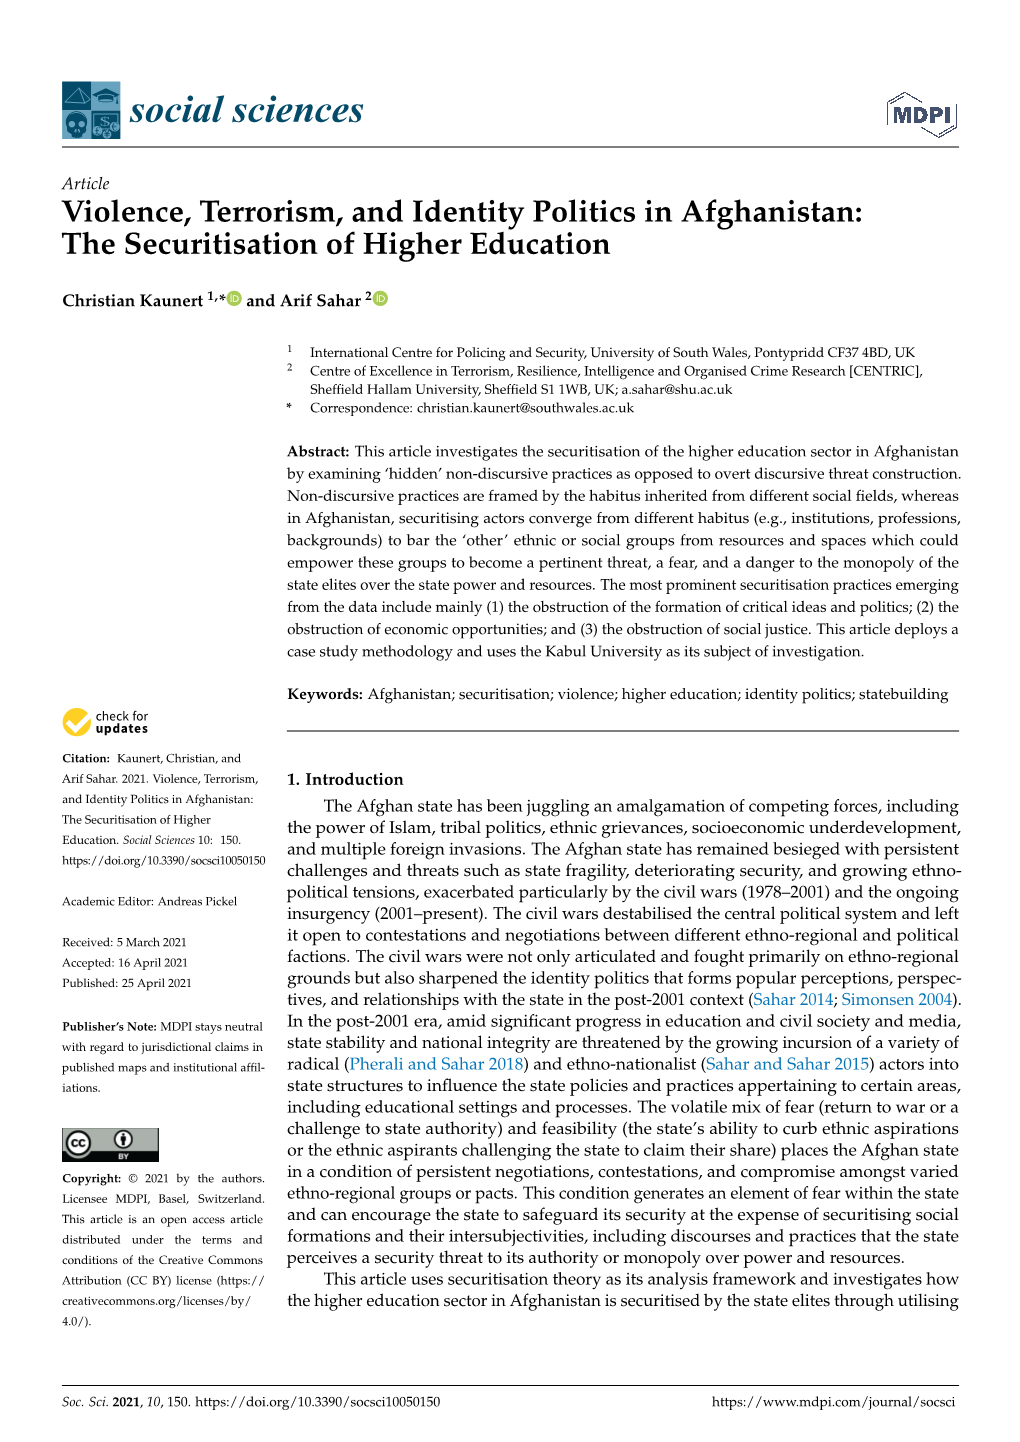 Violence, Terrorism, and Identity Politics in Afghanistan: the Securitisation of Higher Education